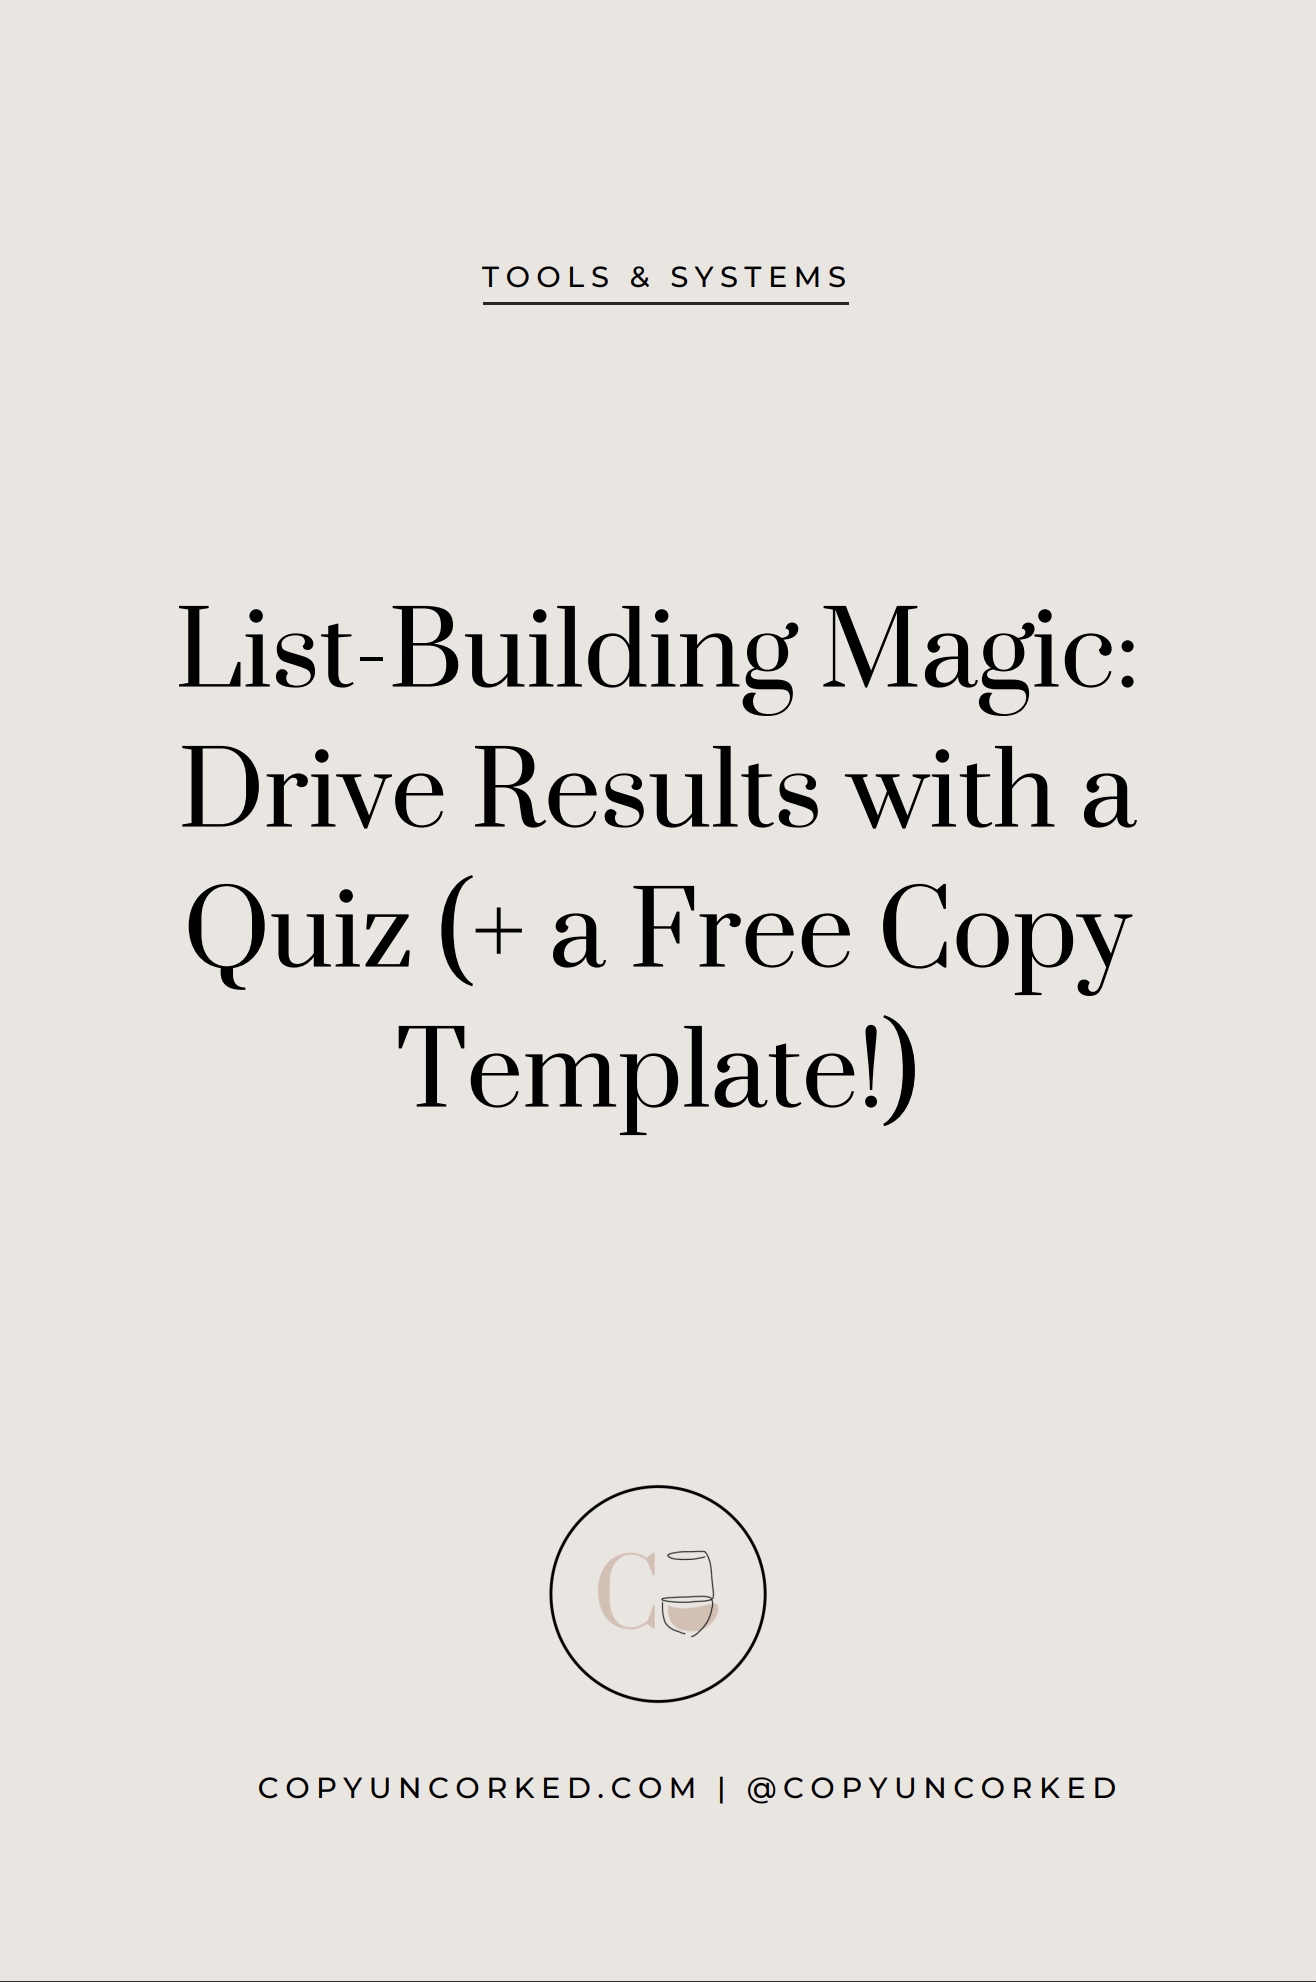 List-Building Magic: Drive Results with a Quiz (+ a Free Copy Template!) - Copy Uncorked - copyuncorked.com